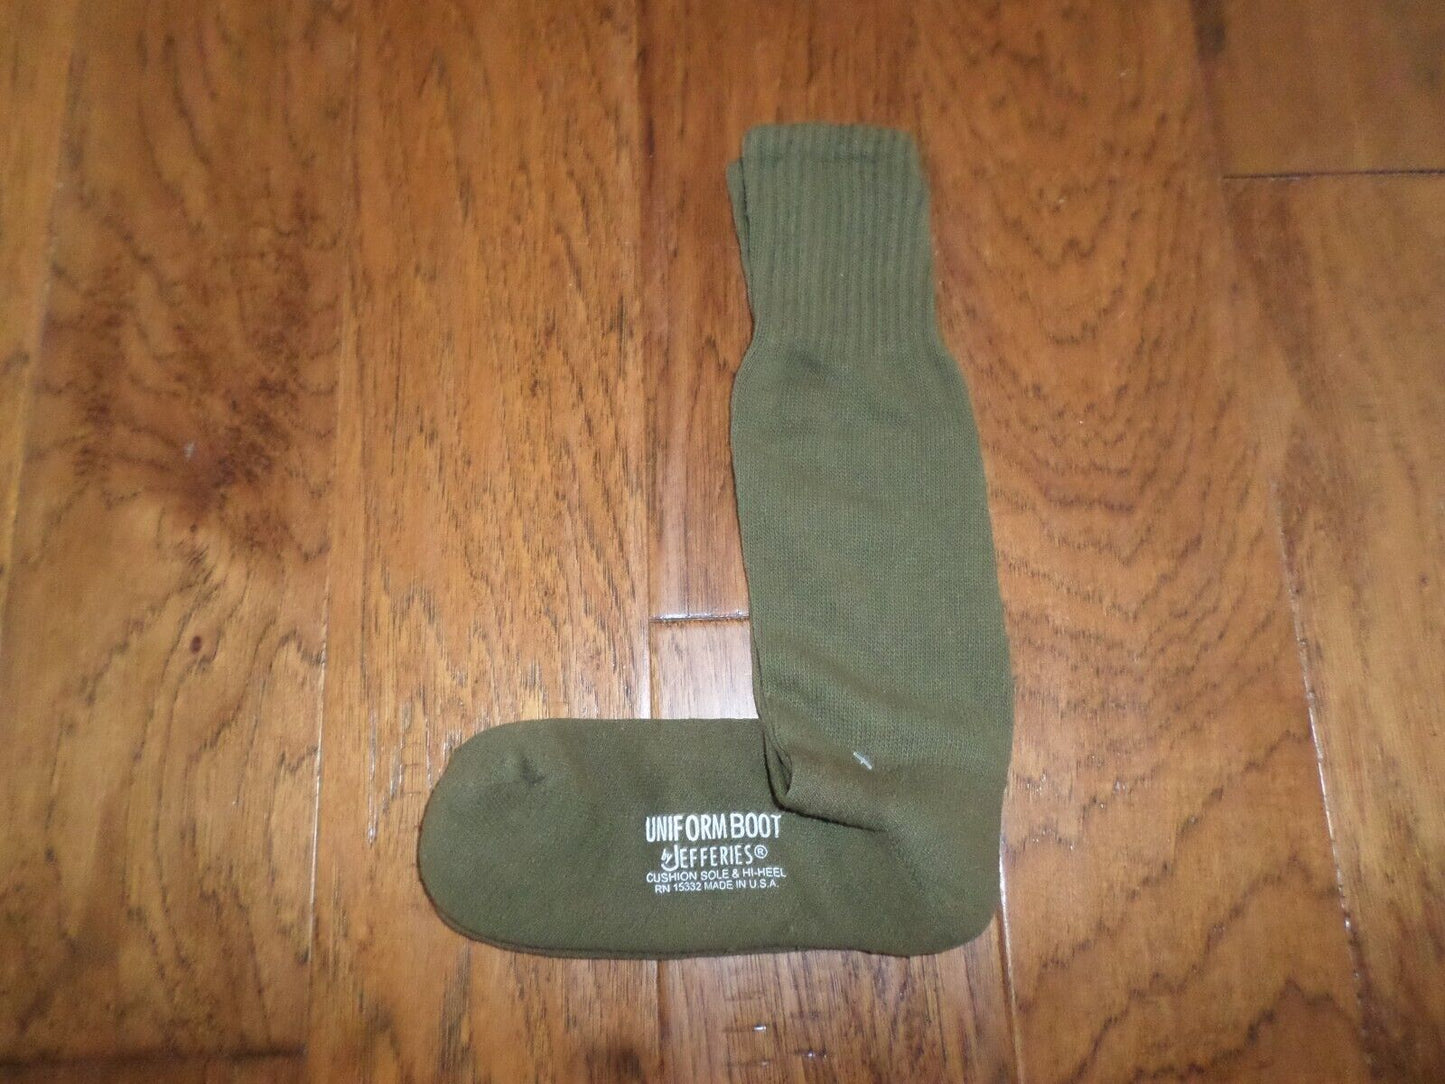 NEW MILITARY ISSUE CUSHION SOLE BOOT SOCKS U.S.A MADE OD GREEN LARGE 10-13